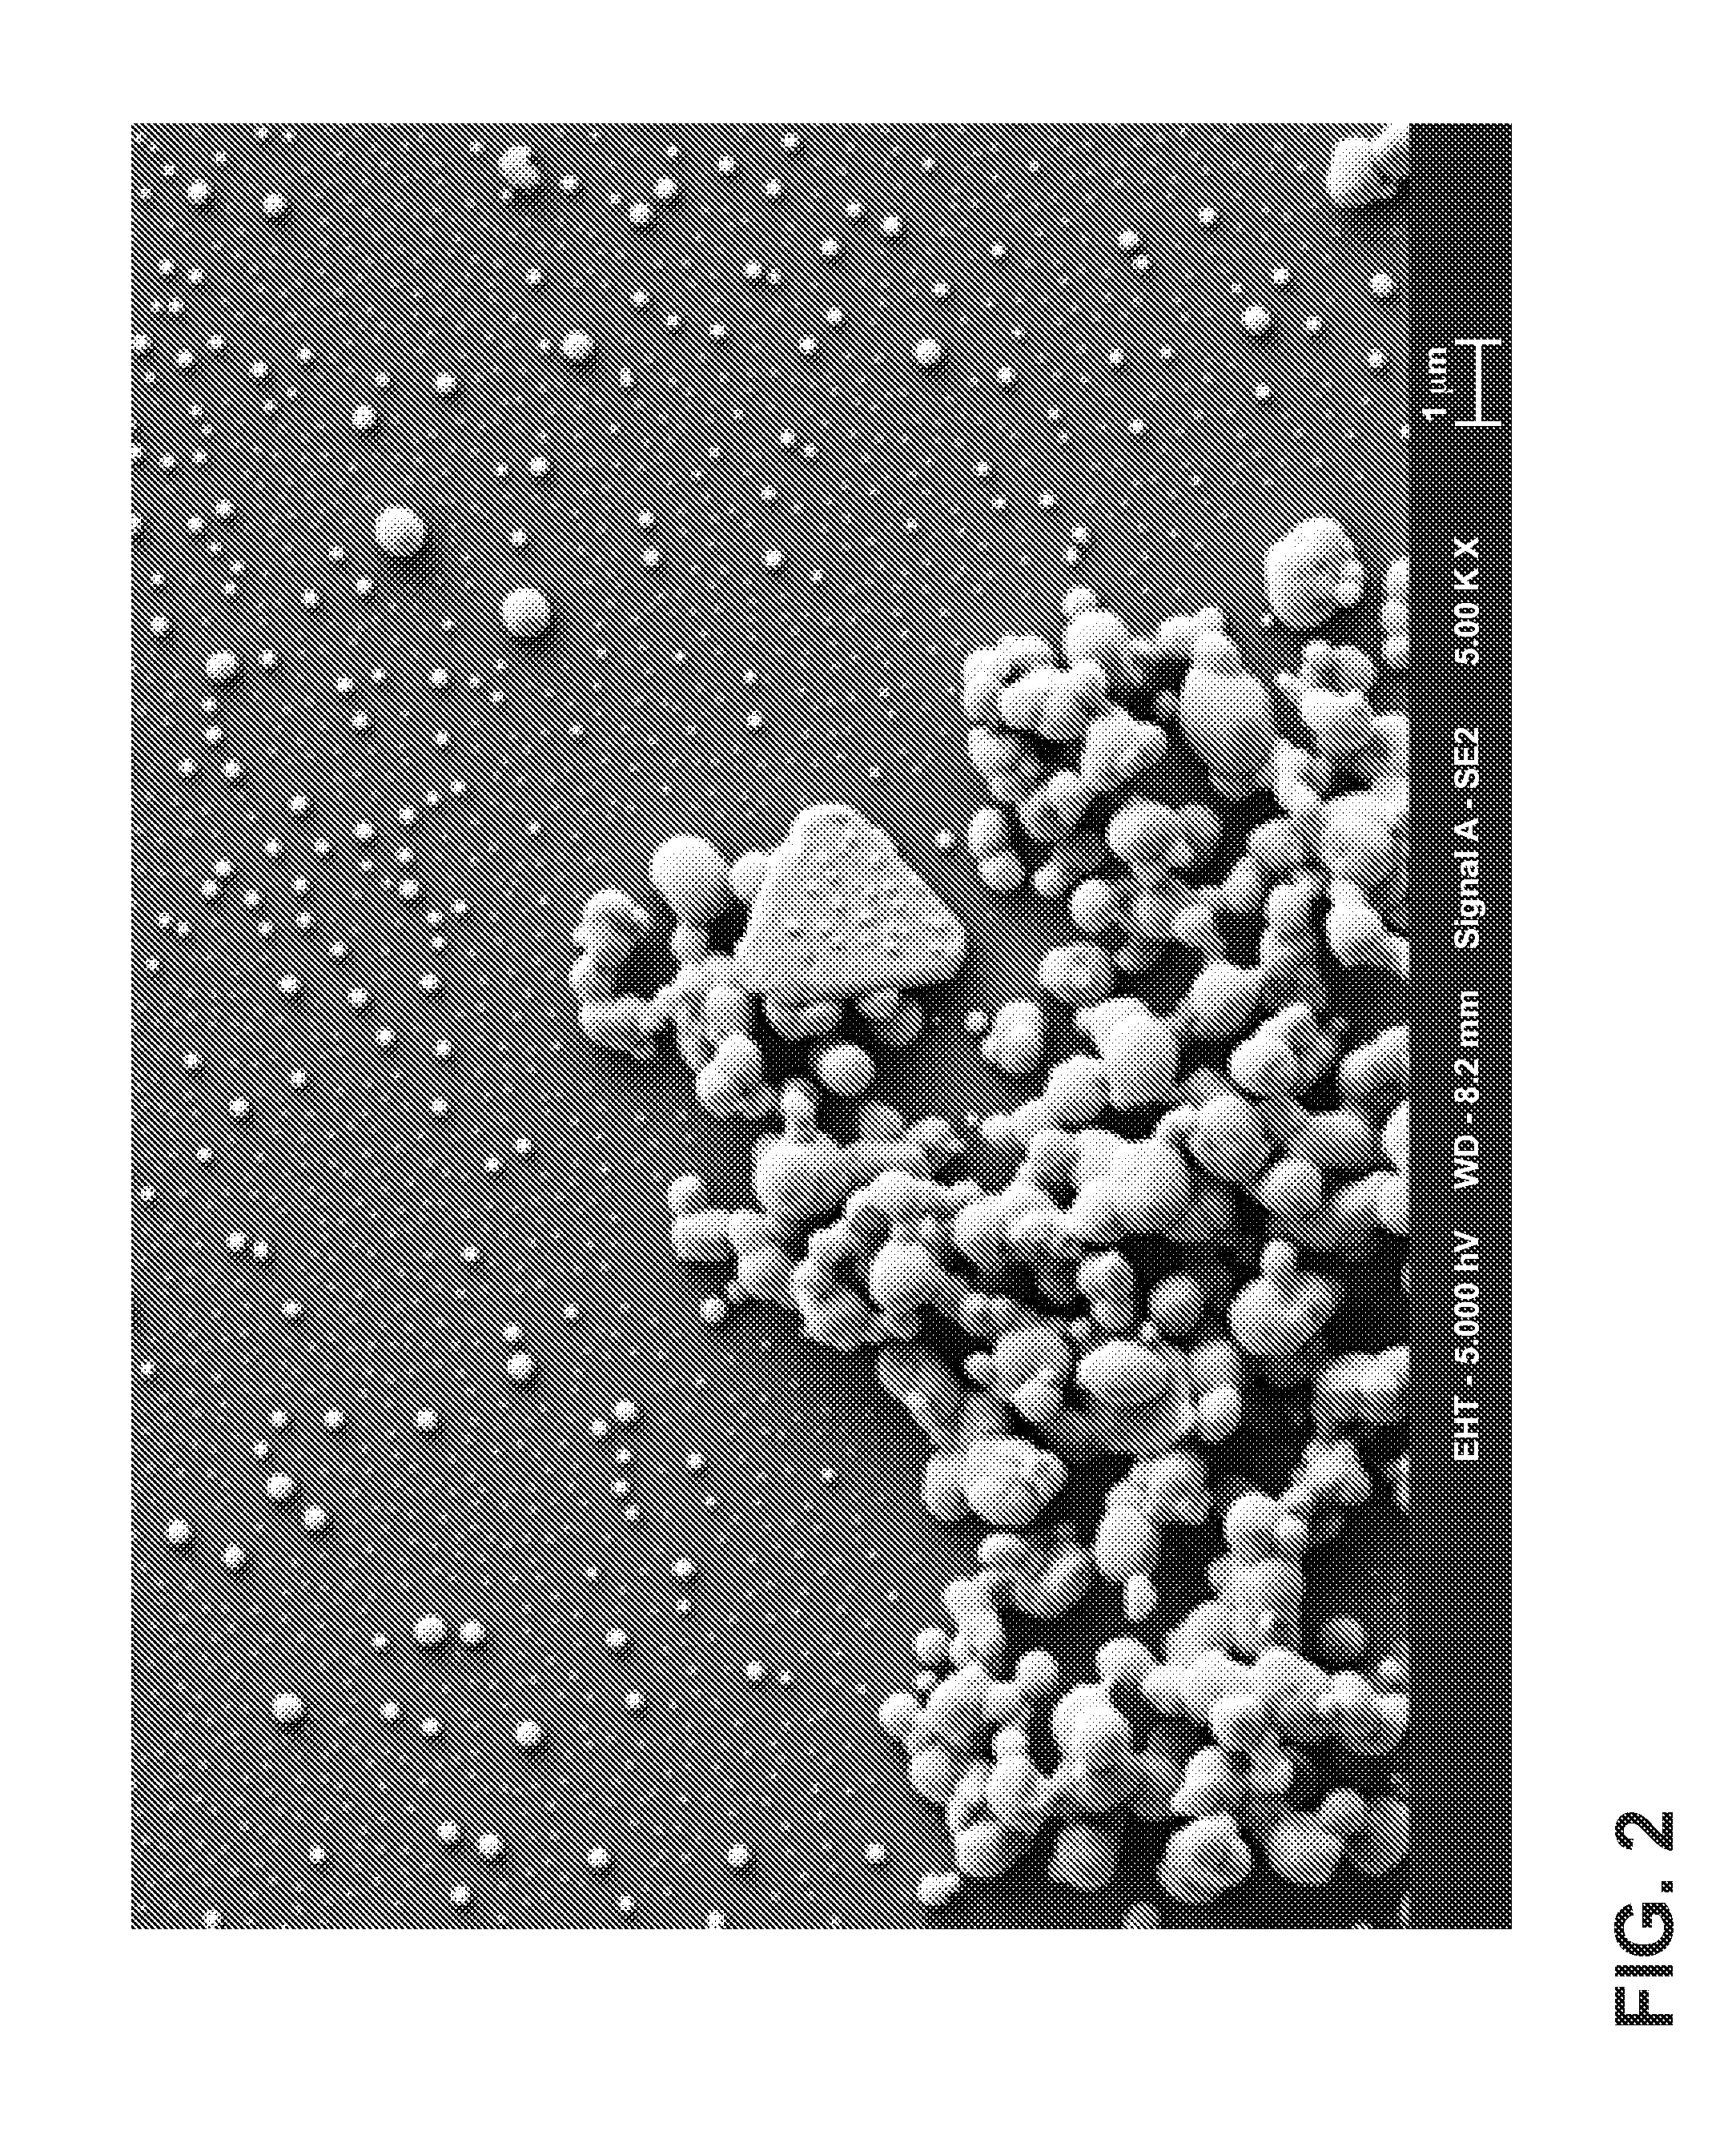 Antimicrobial glass articles and methods of making and using same